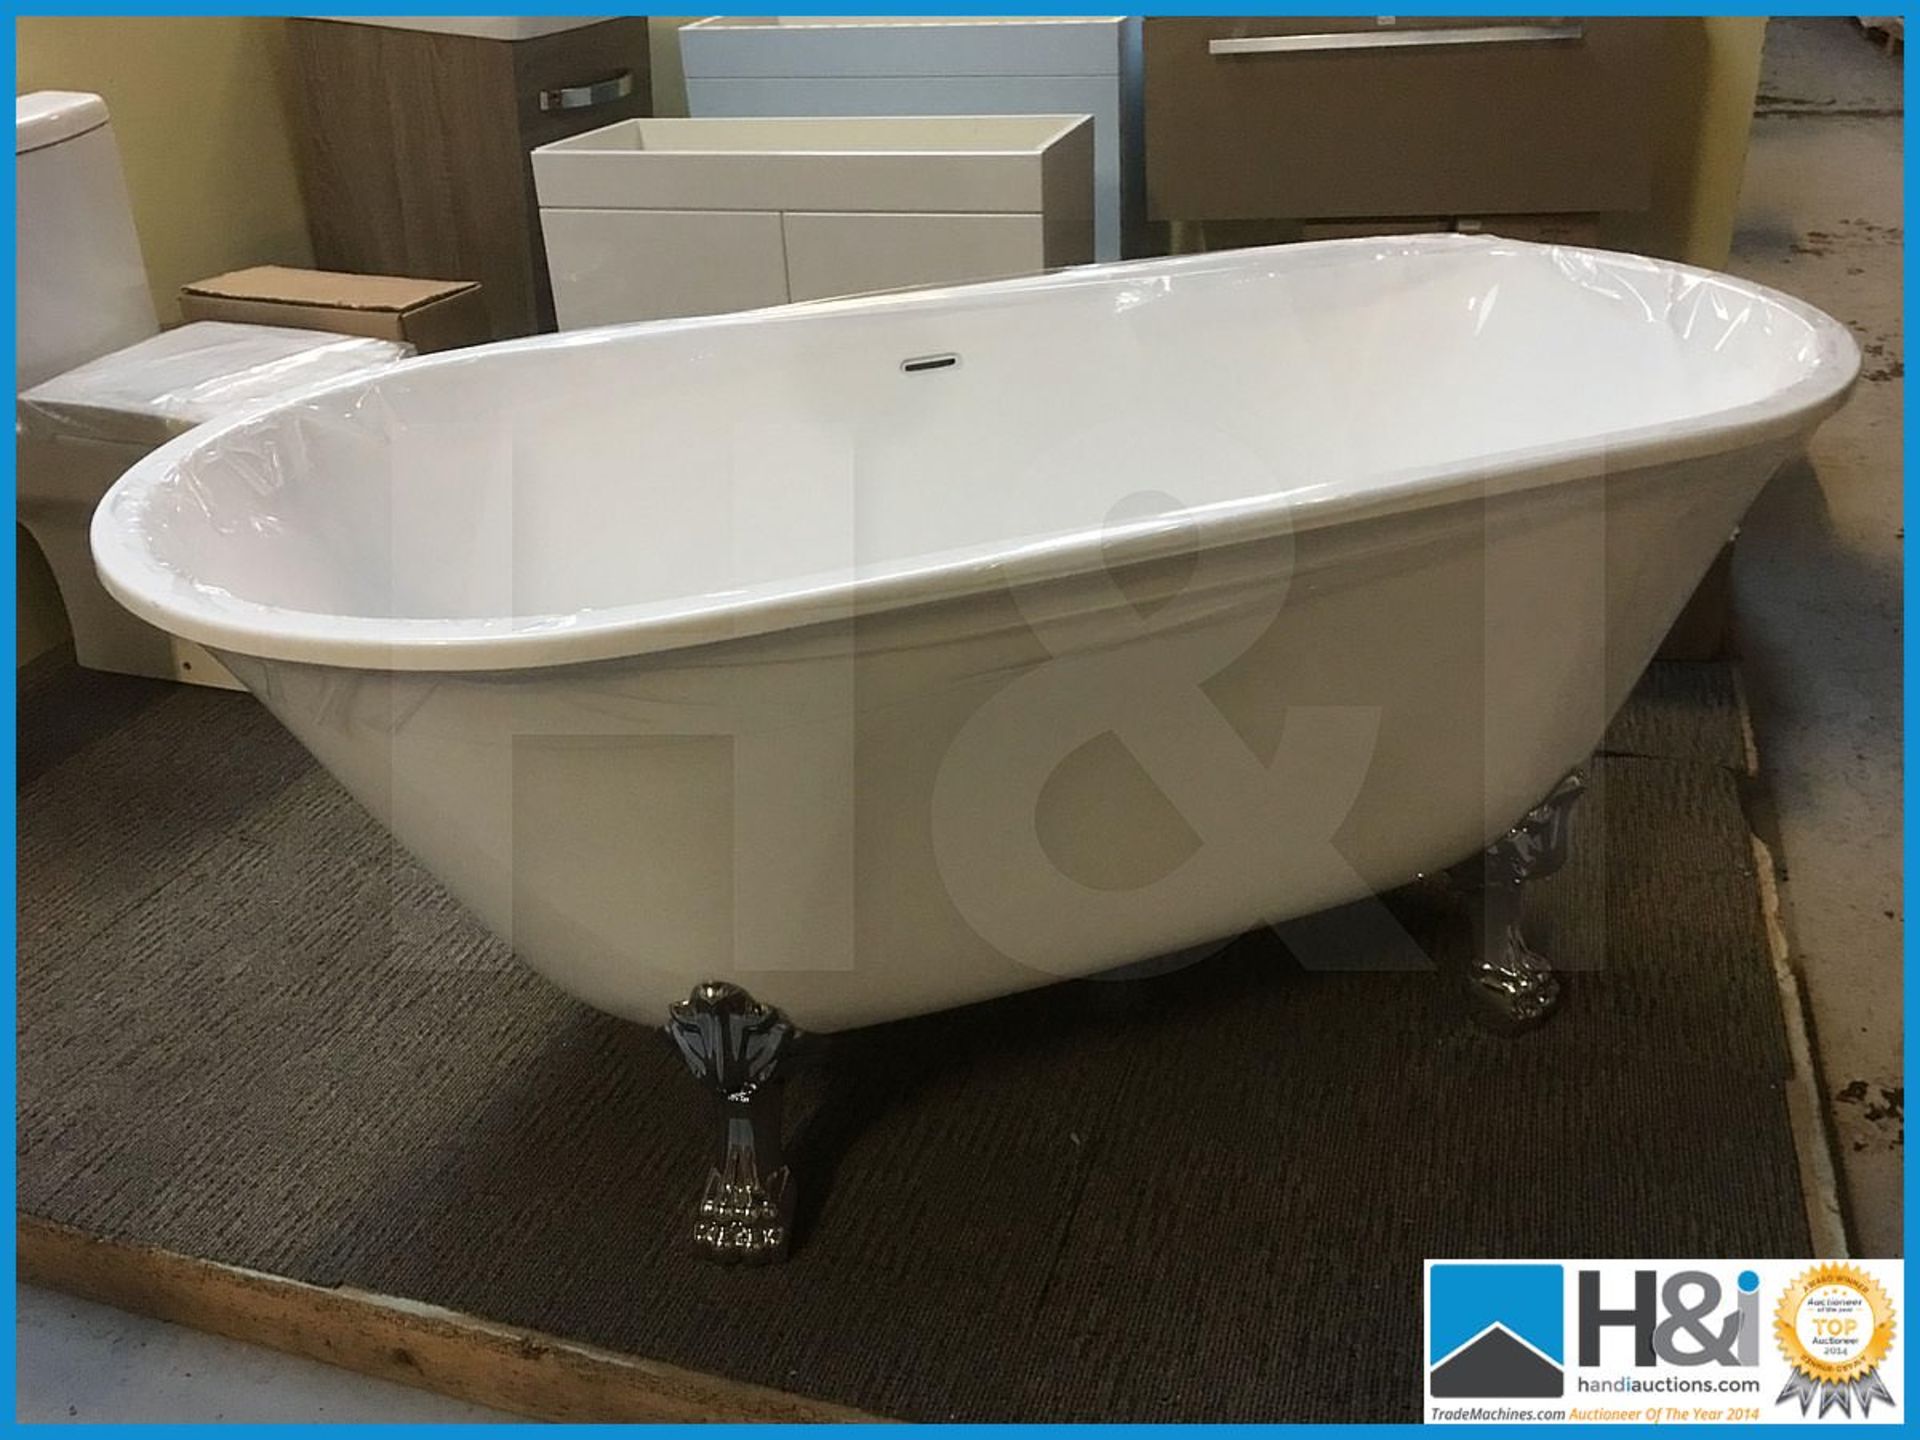 Stunning Hudson Reed Wycomber freestanding bathtub compete with traditional claw feet. High - Image 2 of 4